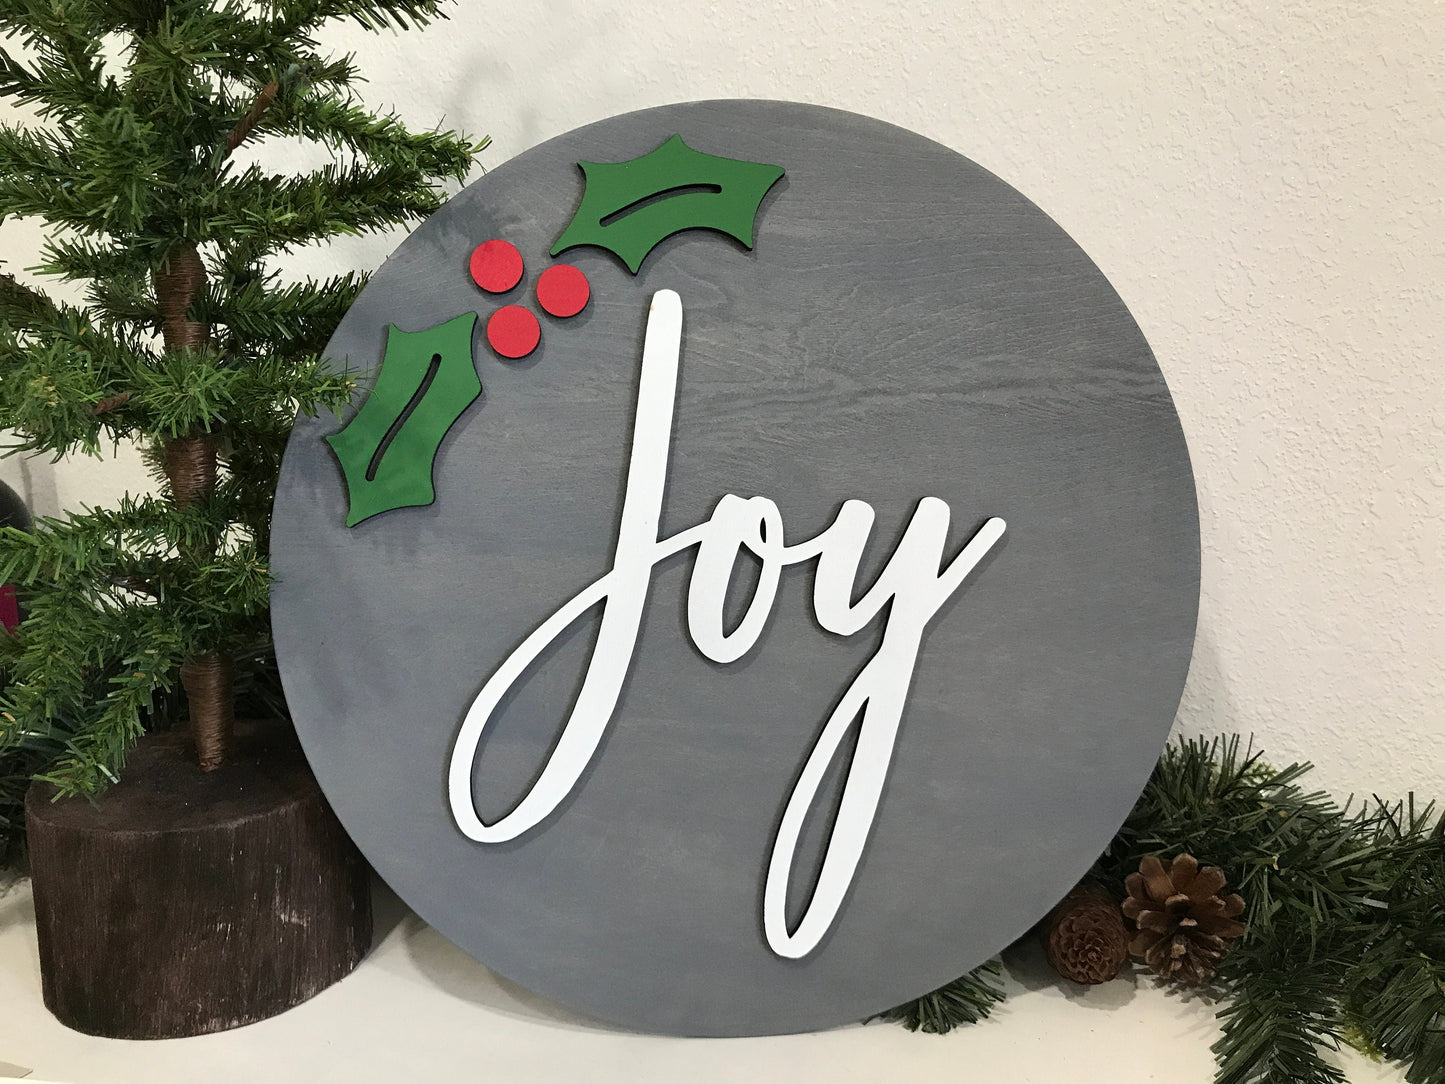 Joy sign, Christmas decorations, 3D holiday decor, winter patio wood signs, living room wooden sign wall hanging, holly leaves mantel decor